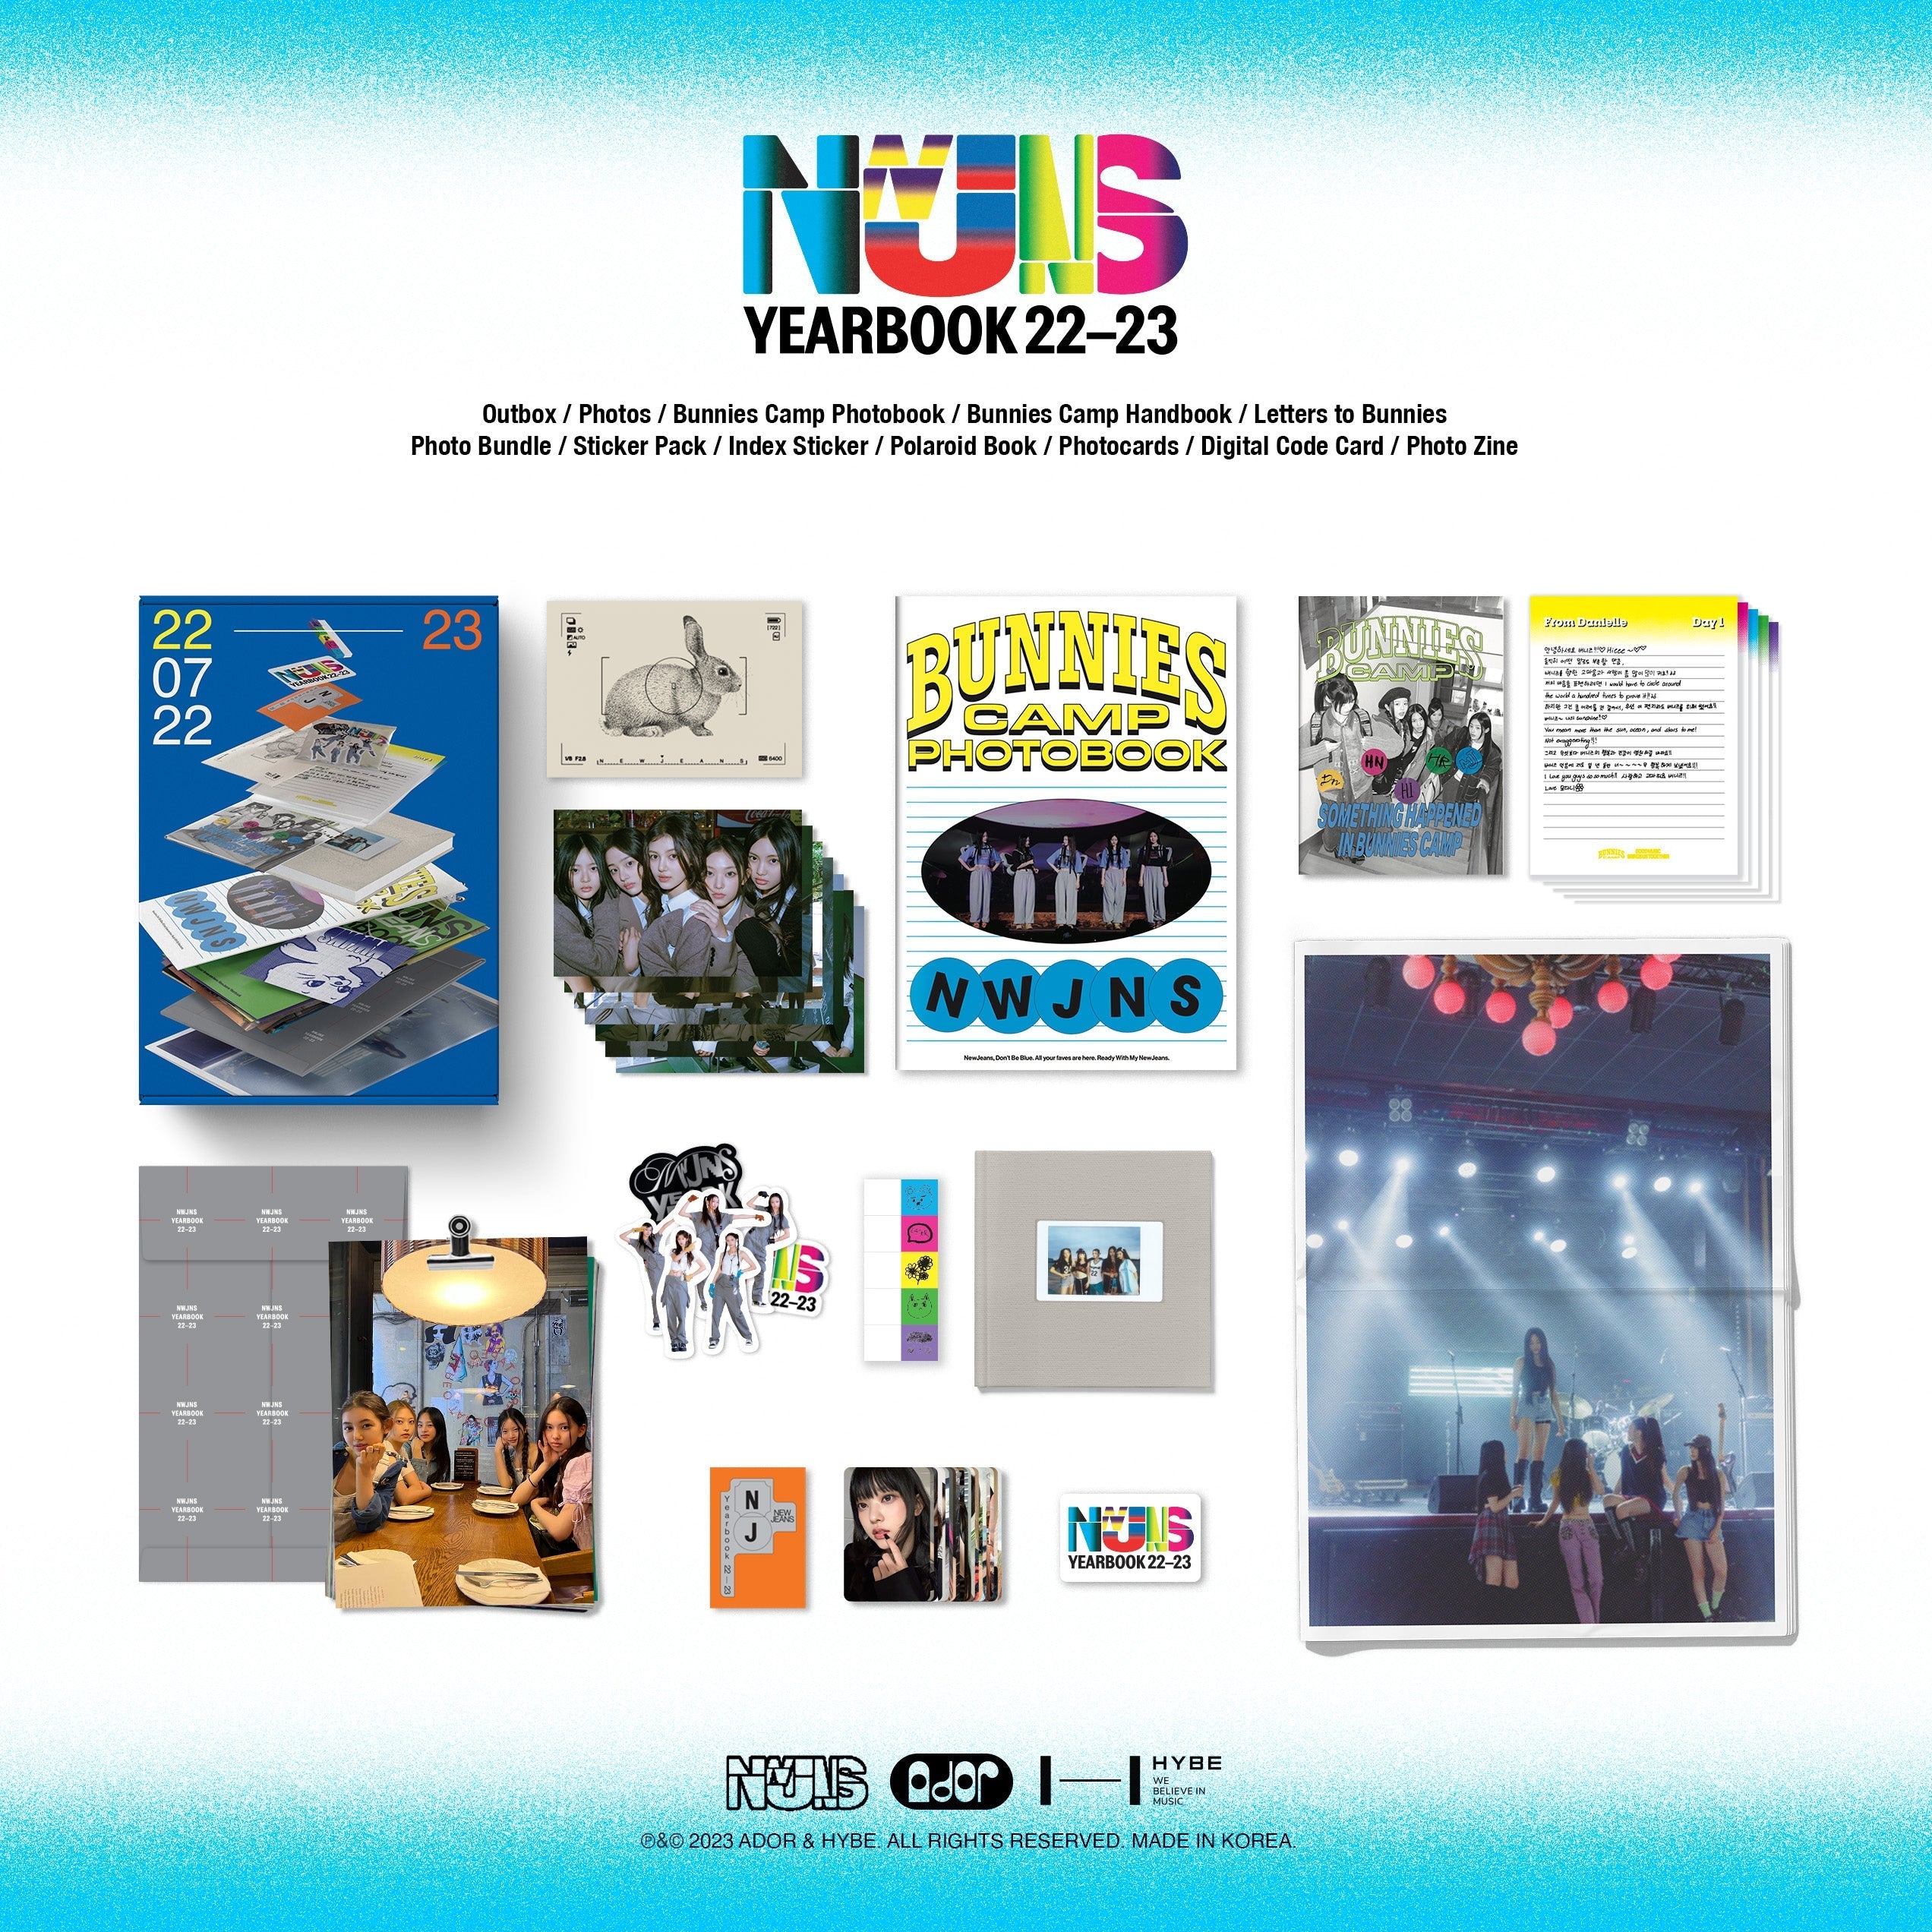 NewJeans - NewJeans YearBook 22-23 + Weverse Shop P.O.B